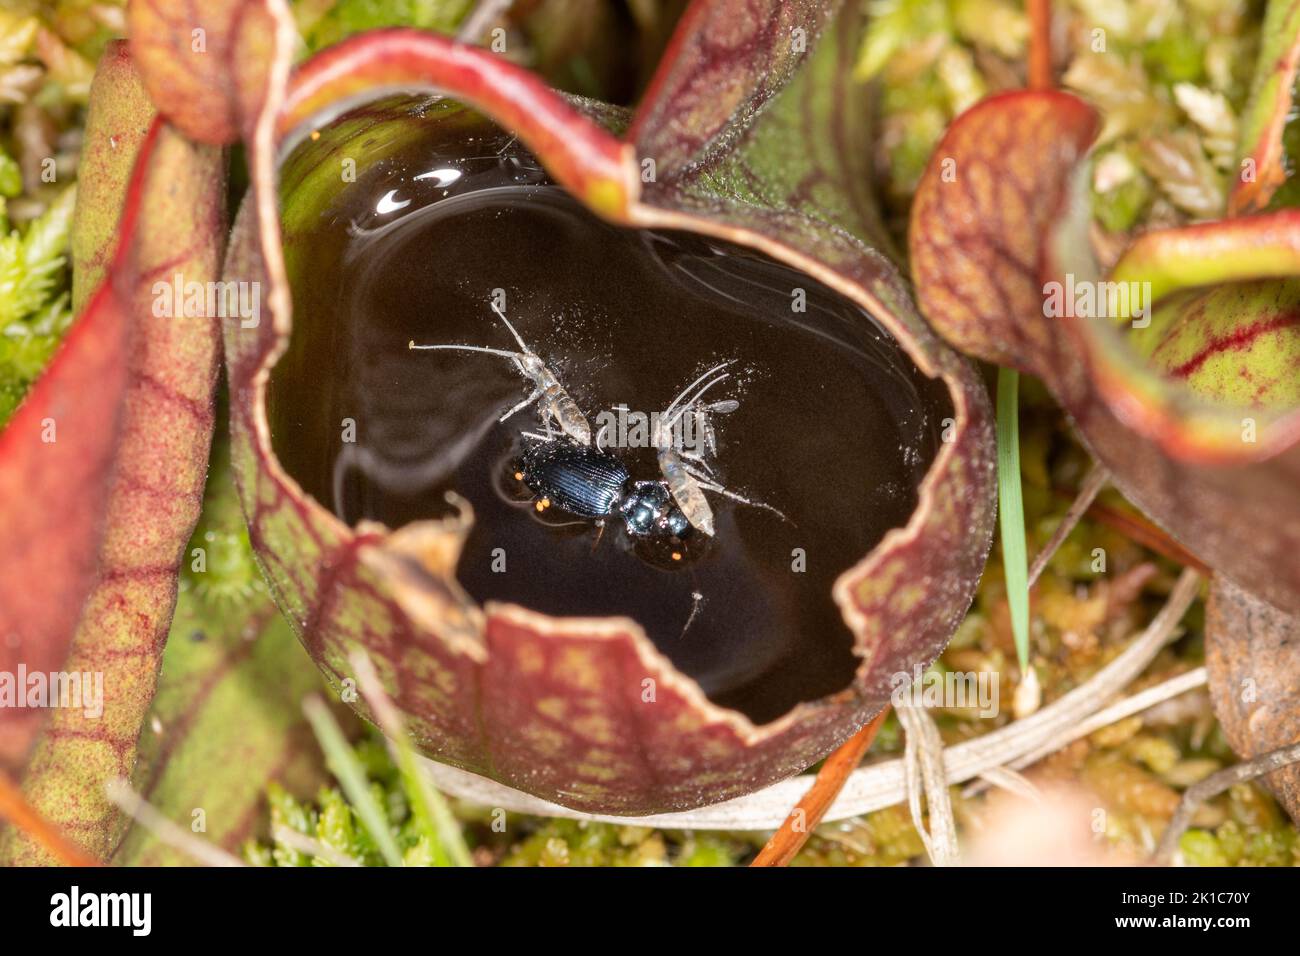 Various insects trapped and drowned inside a pitcher plant, a carnivorous plant, on a bog. Introduced non-native plants in the UK. Stock Photo